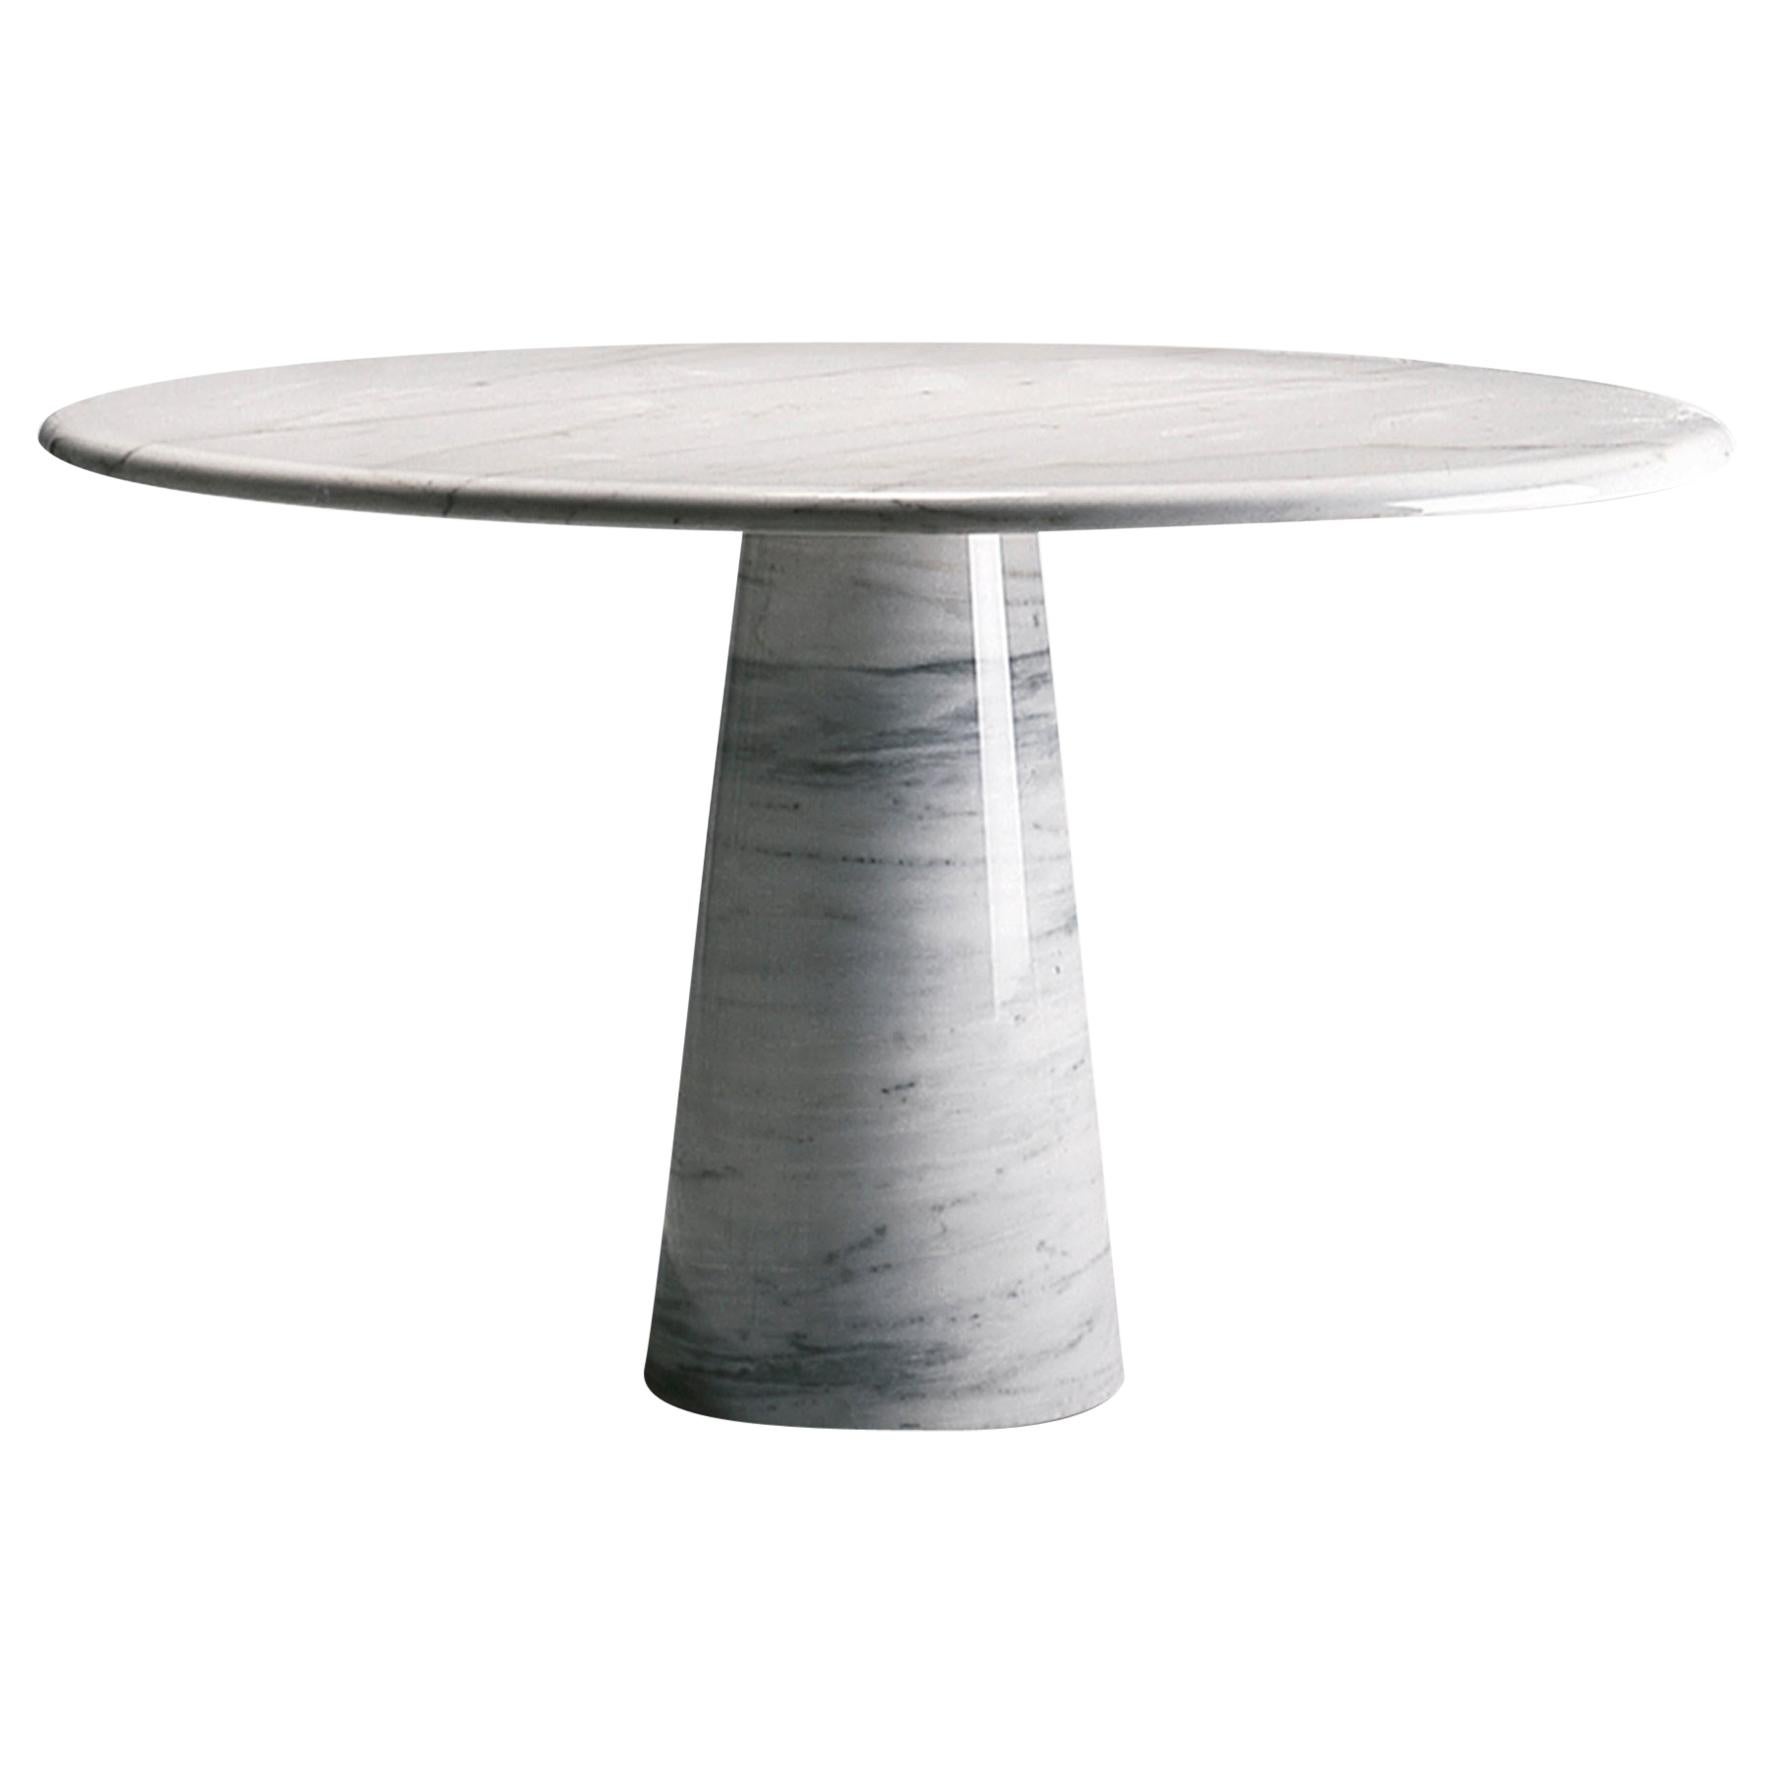 'Colonnata' Round Dining Table D130cm, Travertine, BPS, and More